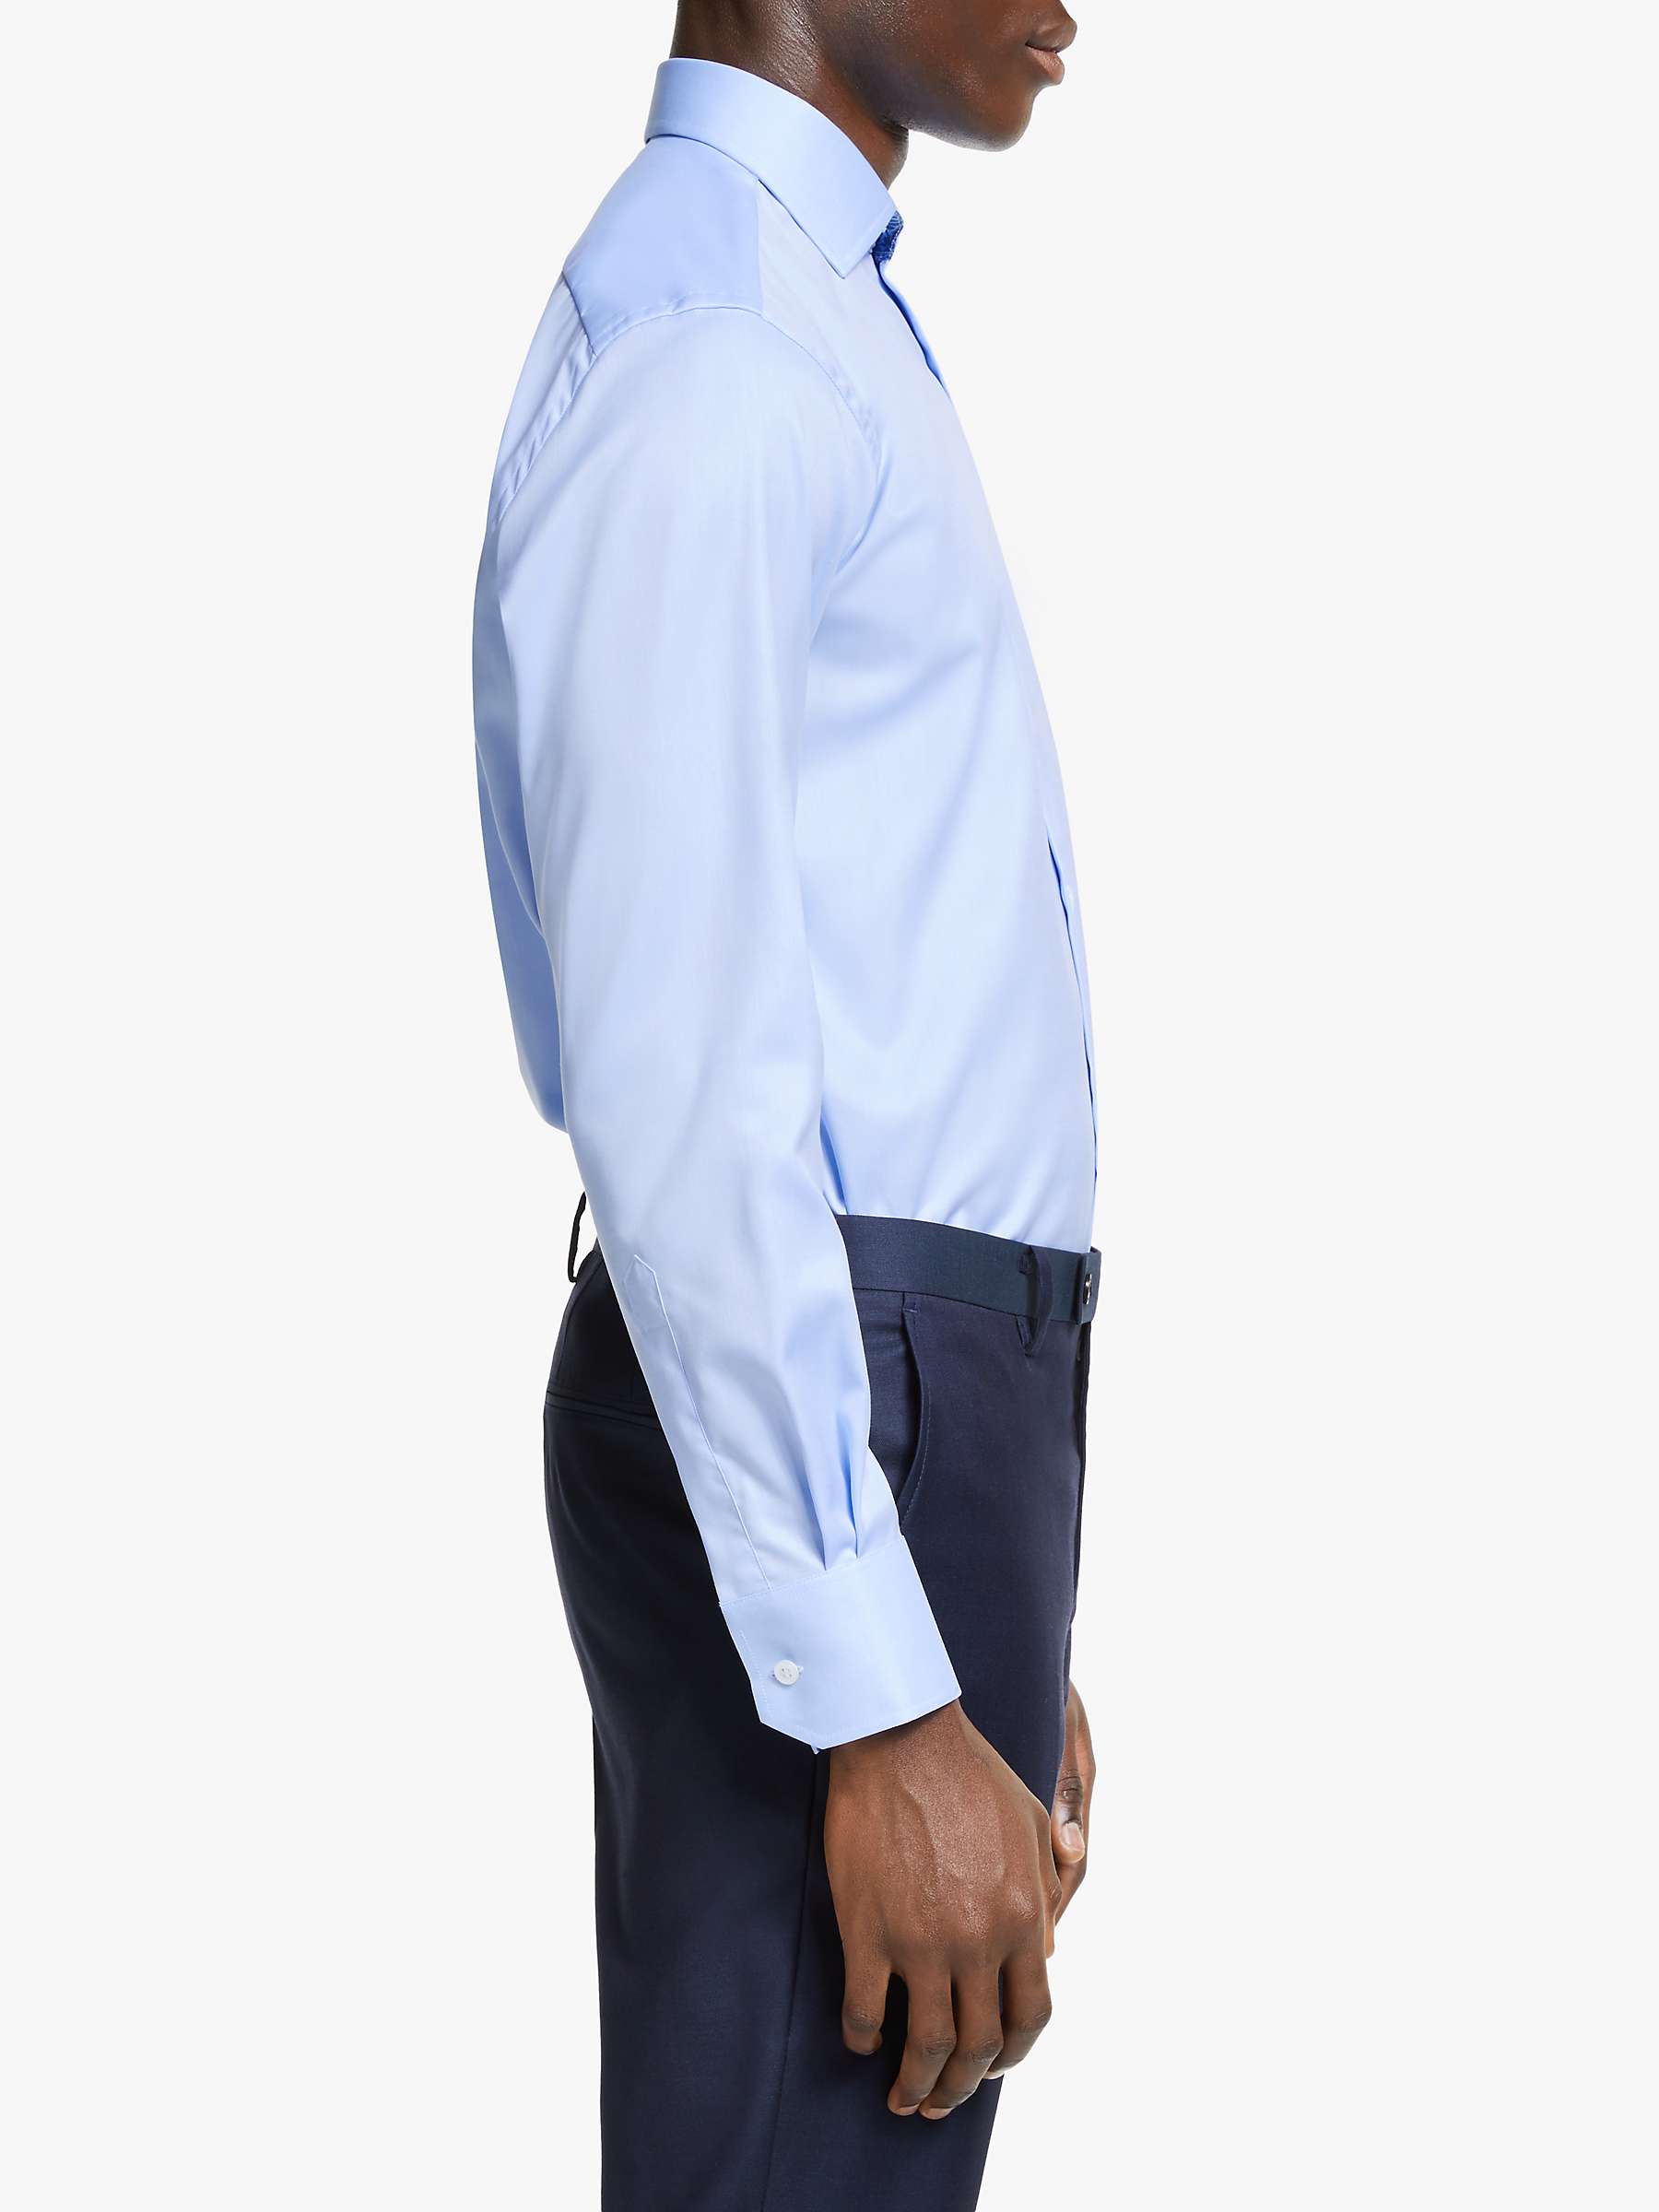 Buy Smyth & Gibson Cotton Twill Contemporary Fit Shirt Online at johnlewis.com